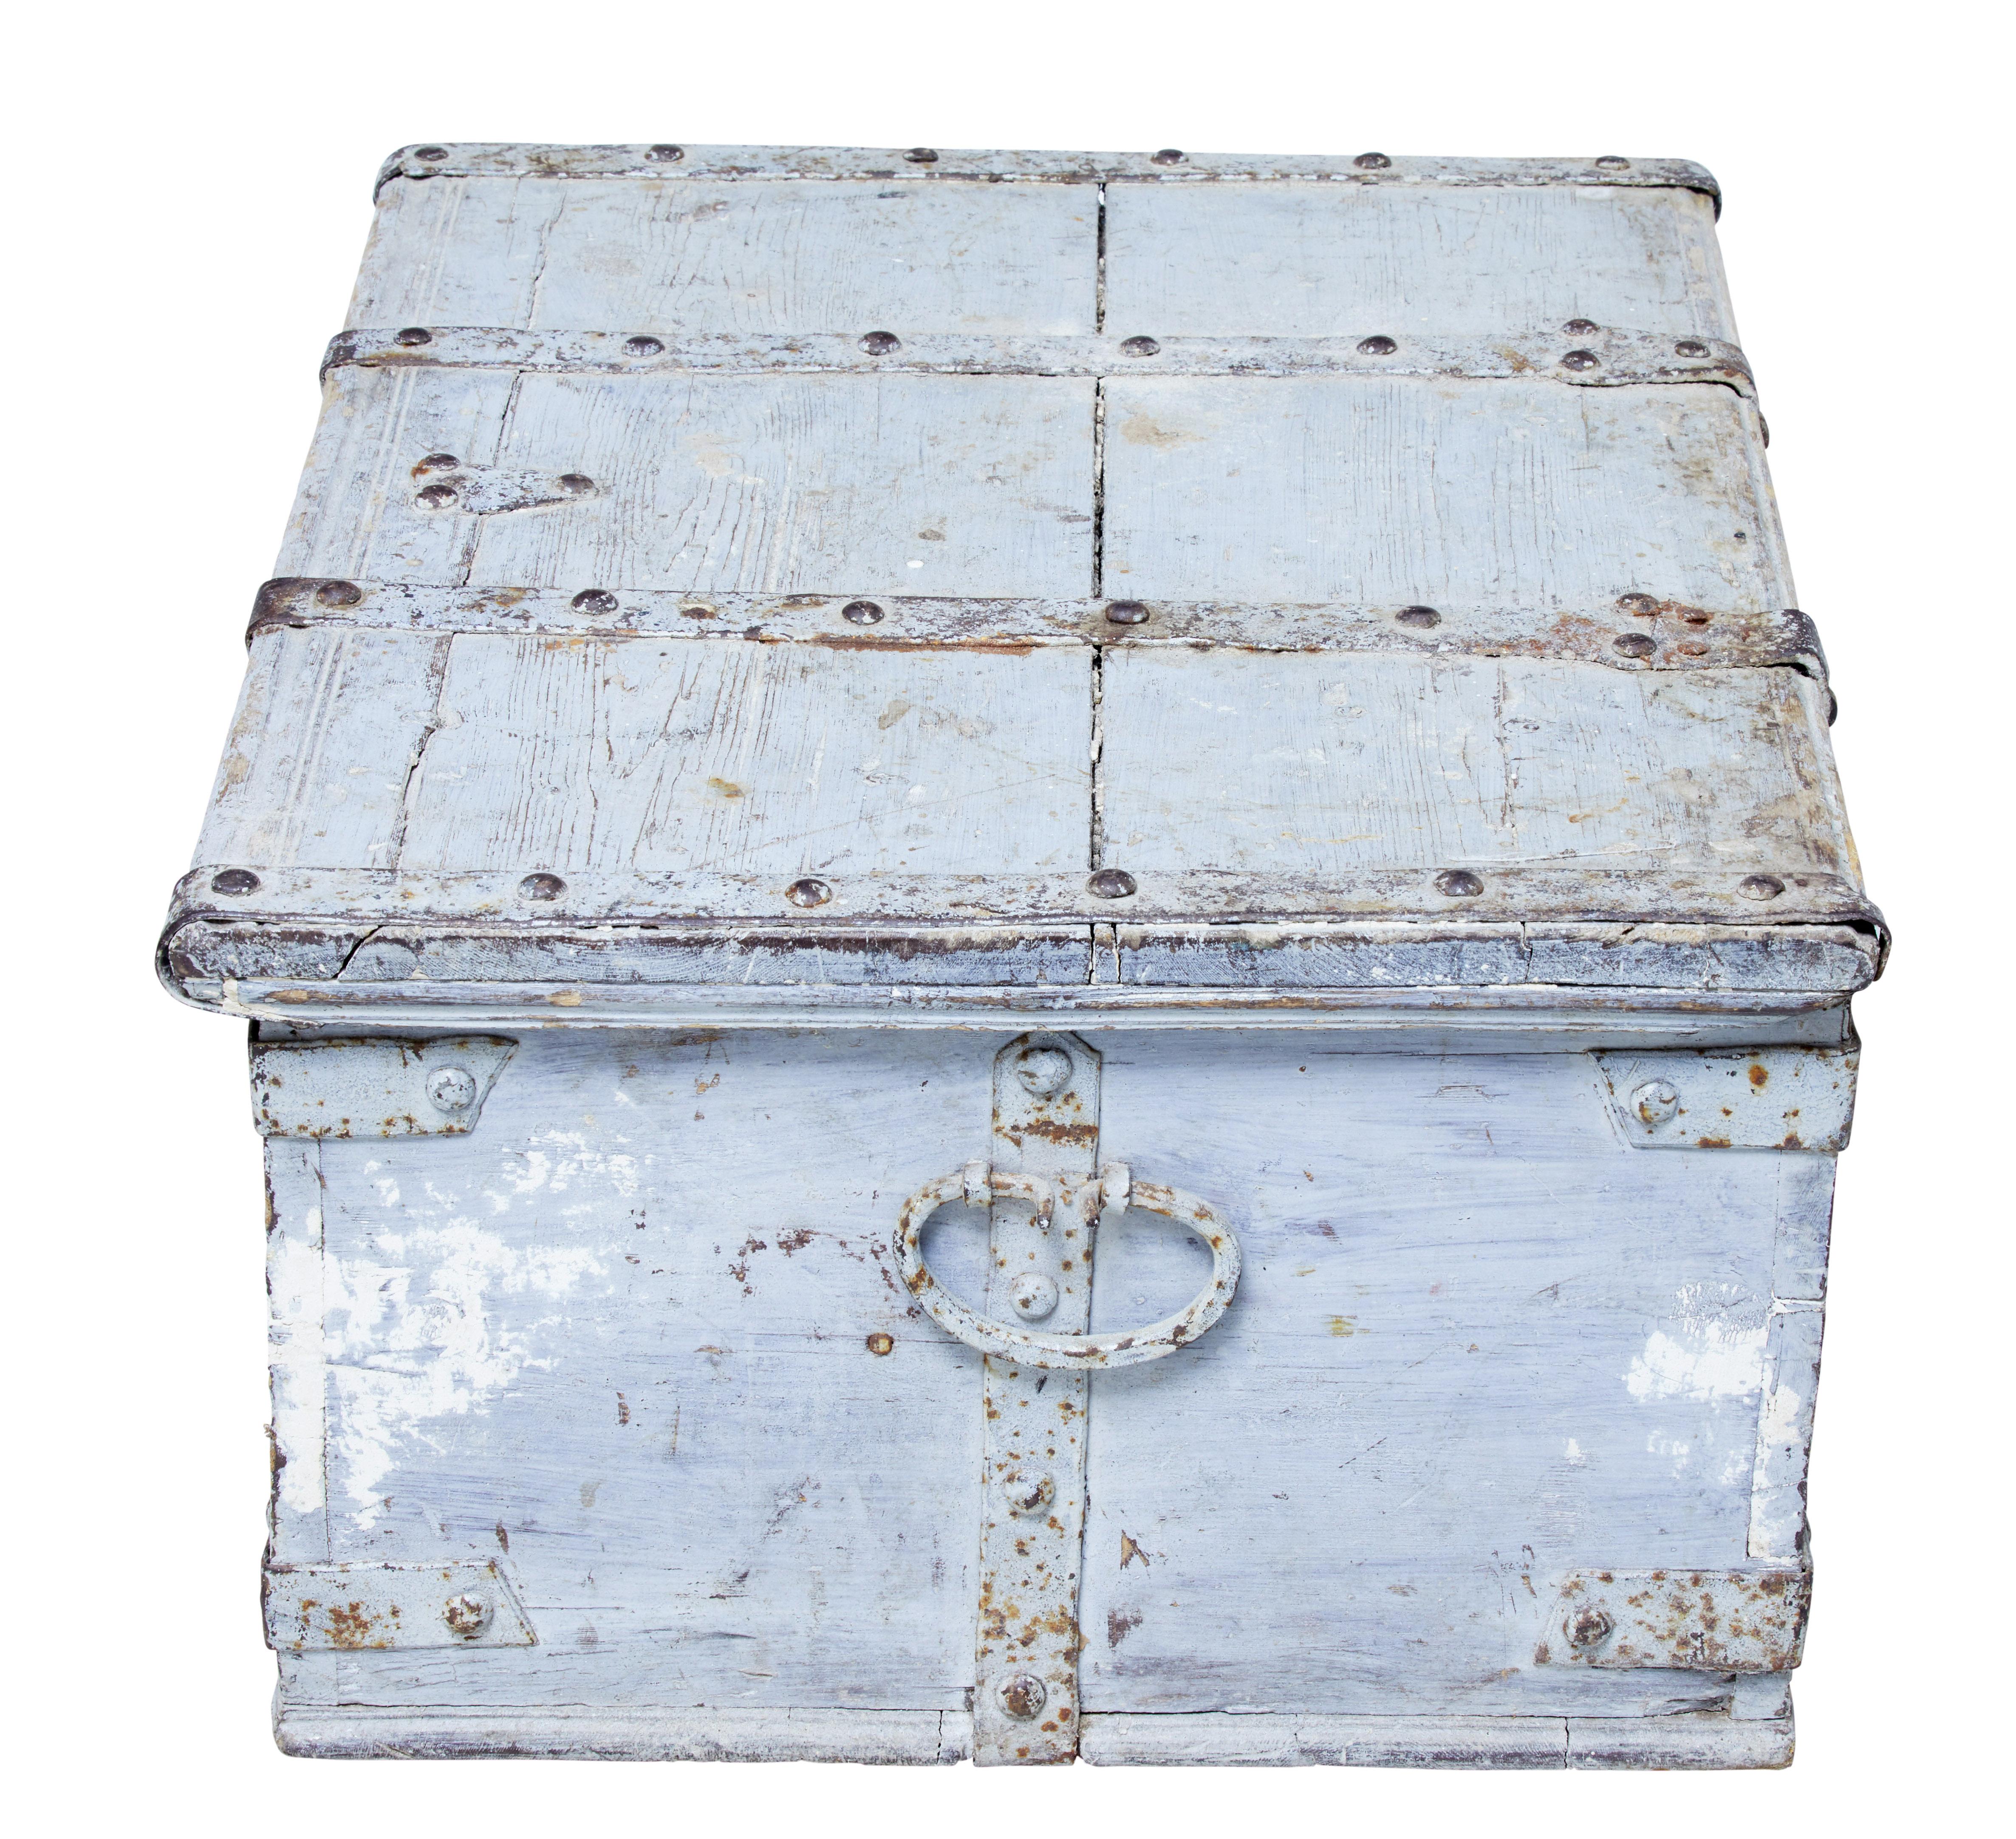 19th century Swedish work box, circa 1870.

Painted strong box with original metal work, lid opens to reveal a separate tray fitted inside.

Obvious signs of use and losses to paint, but fit for use.